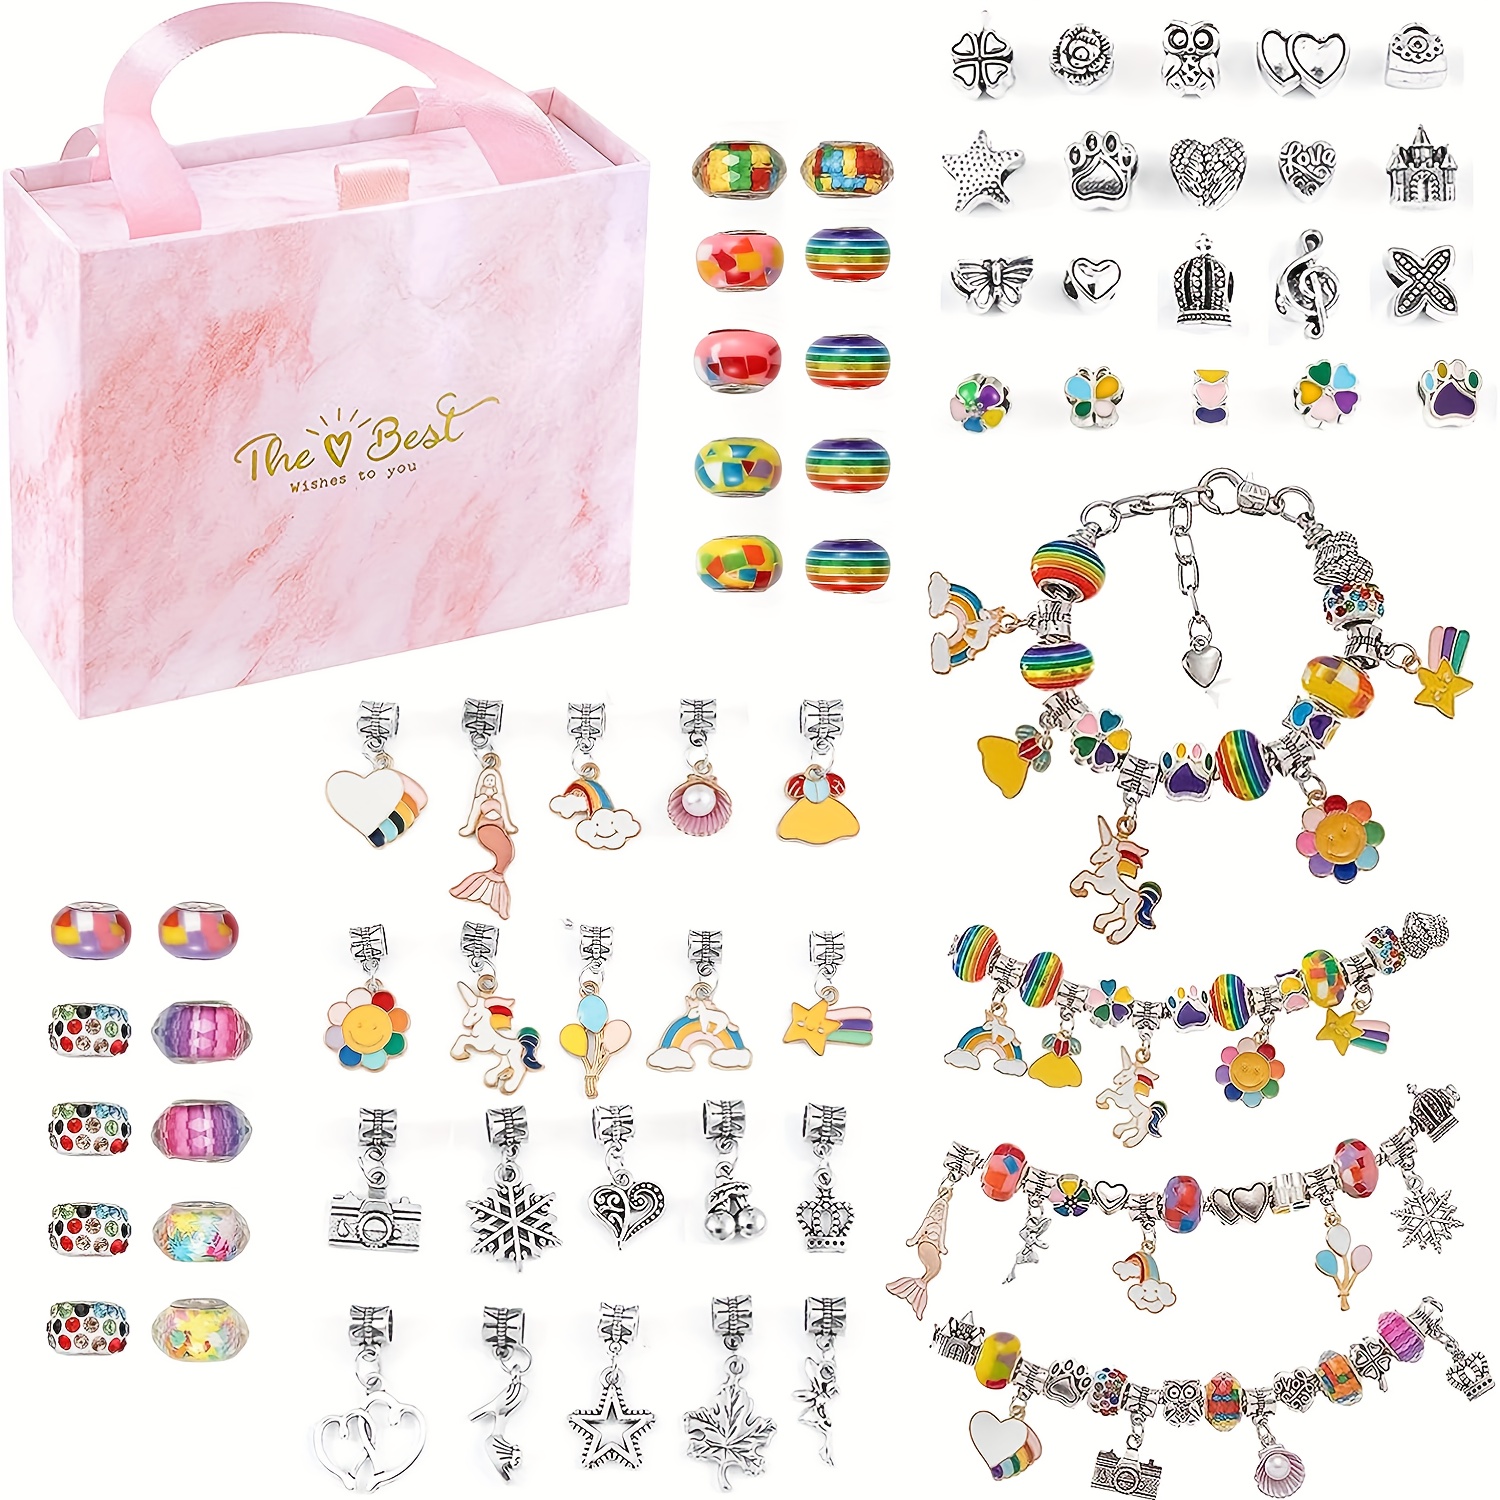 112PCS Charms Bracelet Making Kit,Jewelry Kits for Teens Girls with rainbow  fish tail DIY Gifts for Birthday Christmas New Year 